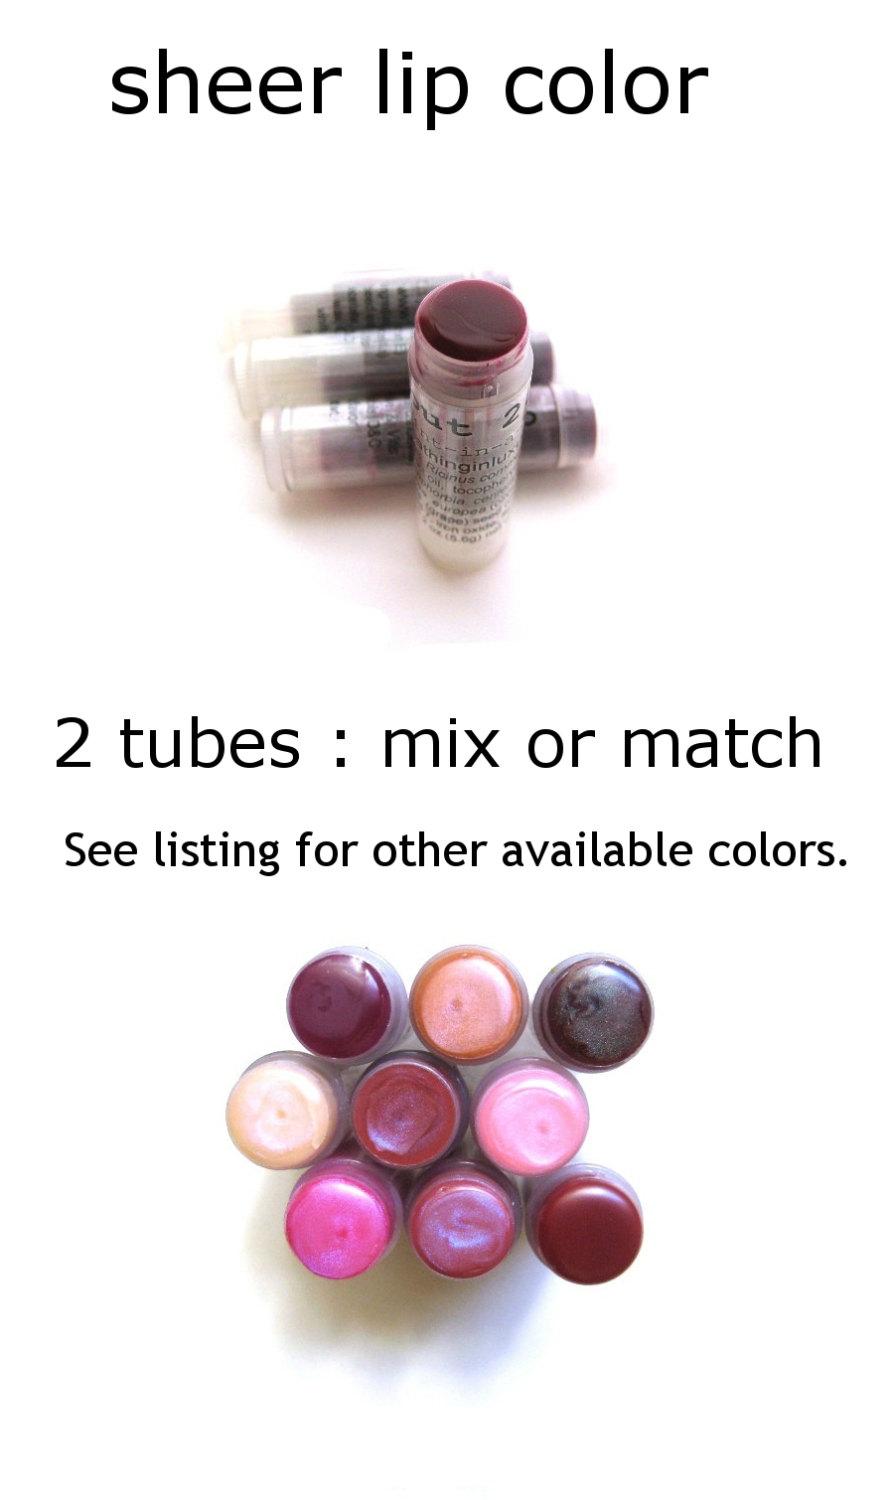 Mariage - Lip Tint 2 Blackberry Lip Tint lip balm Sheer Lip Color Natural sunkiss look any 2 lip tints Mix or Match girlfriend gift for her wife gift